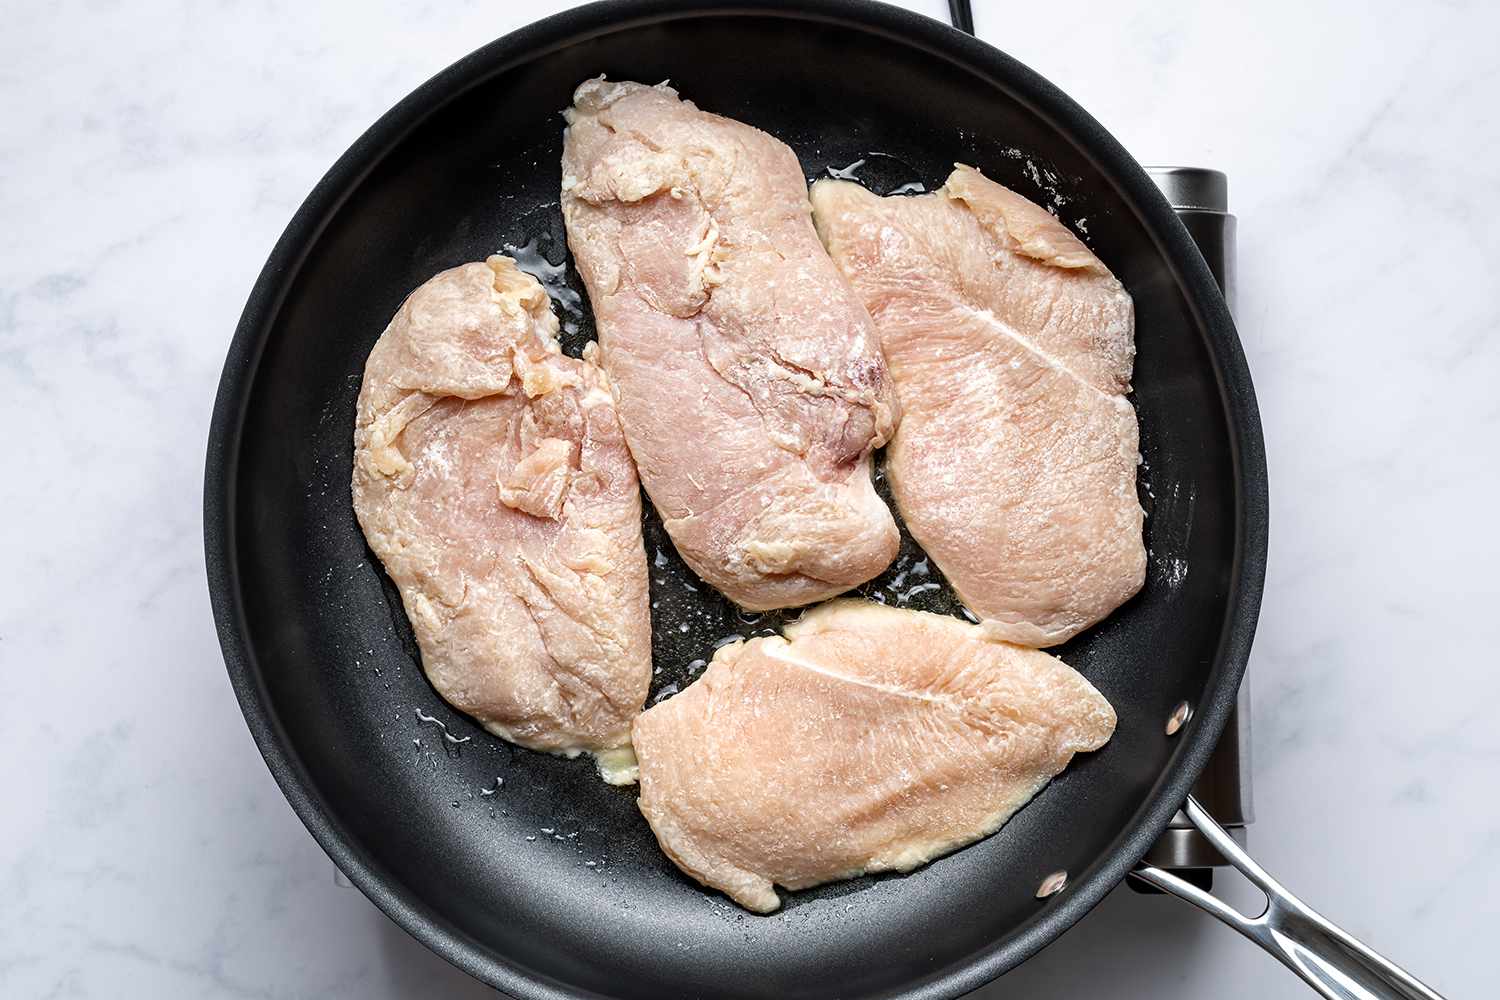 Chicken breasts fitting snugly in a large skillet in a single layer